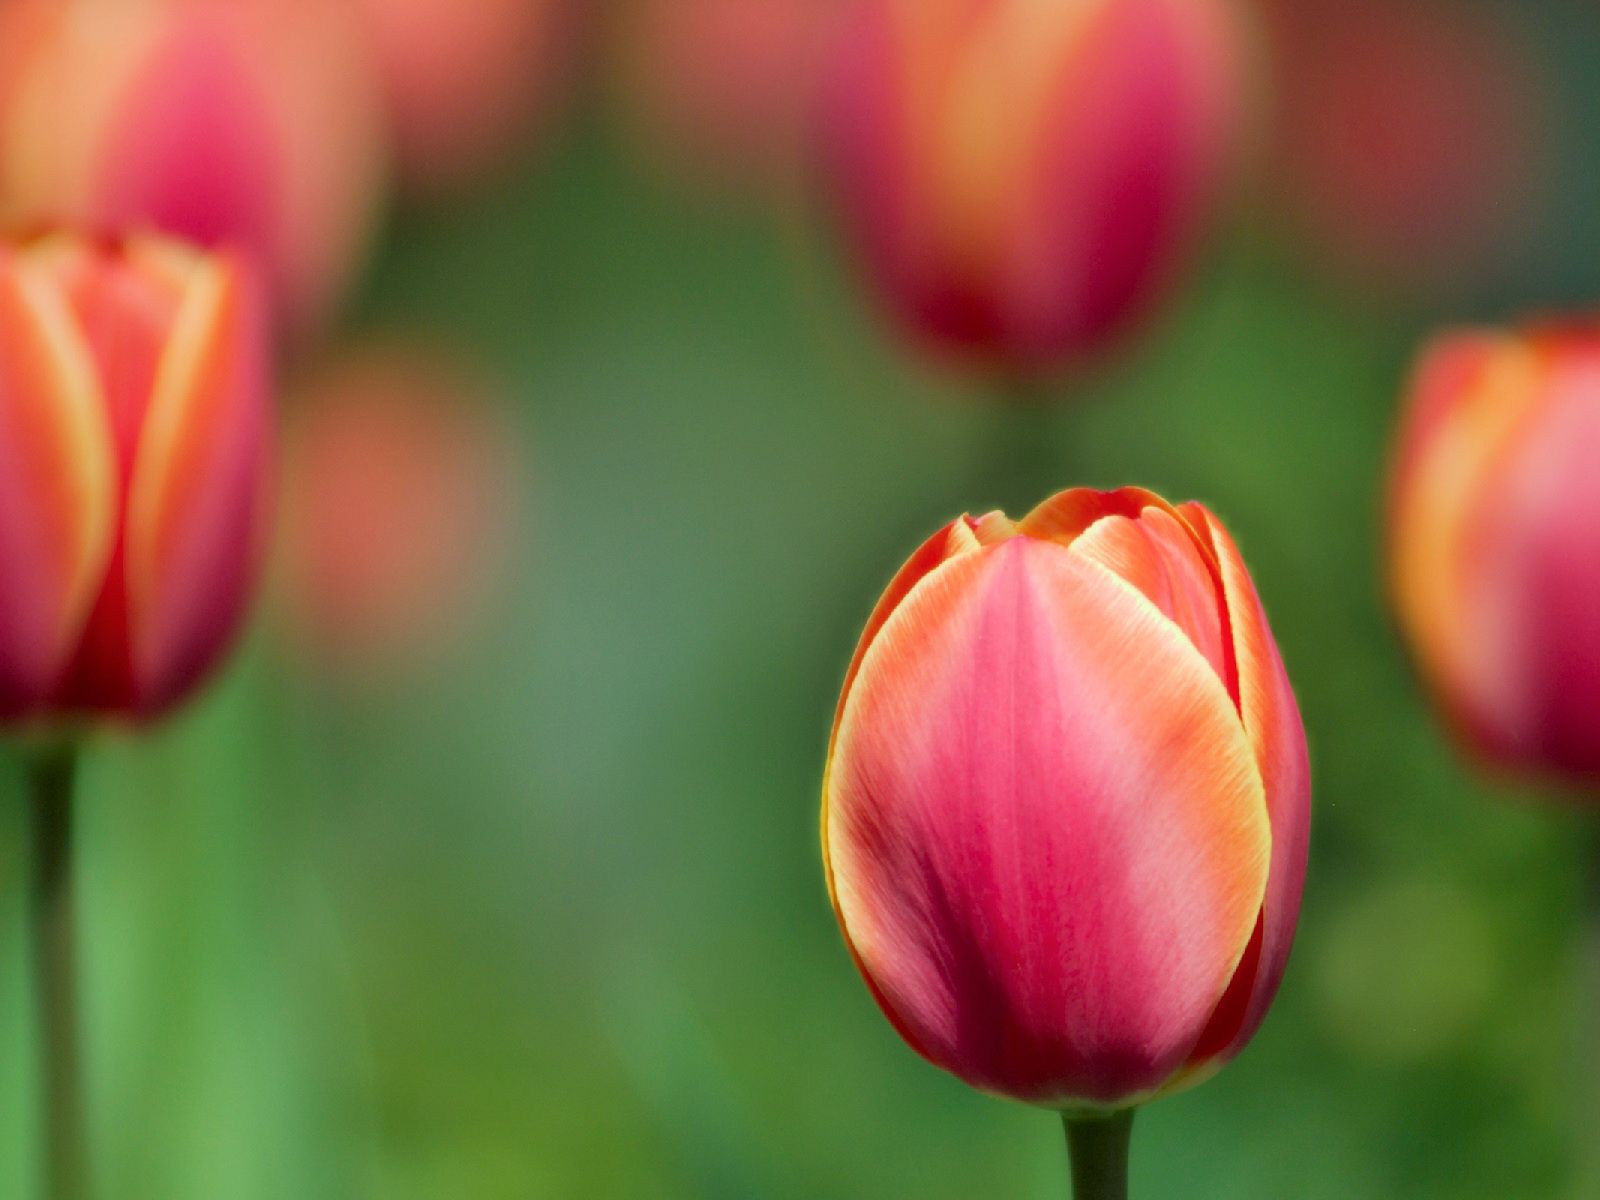 Tulip wallpapers and images - wallpapers, pictures, photos